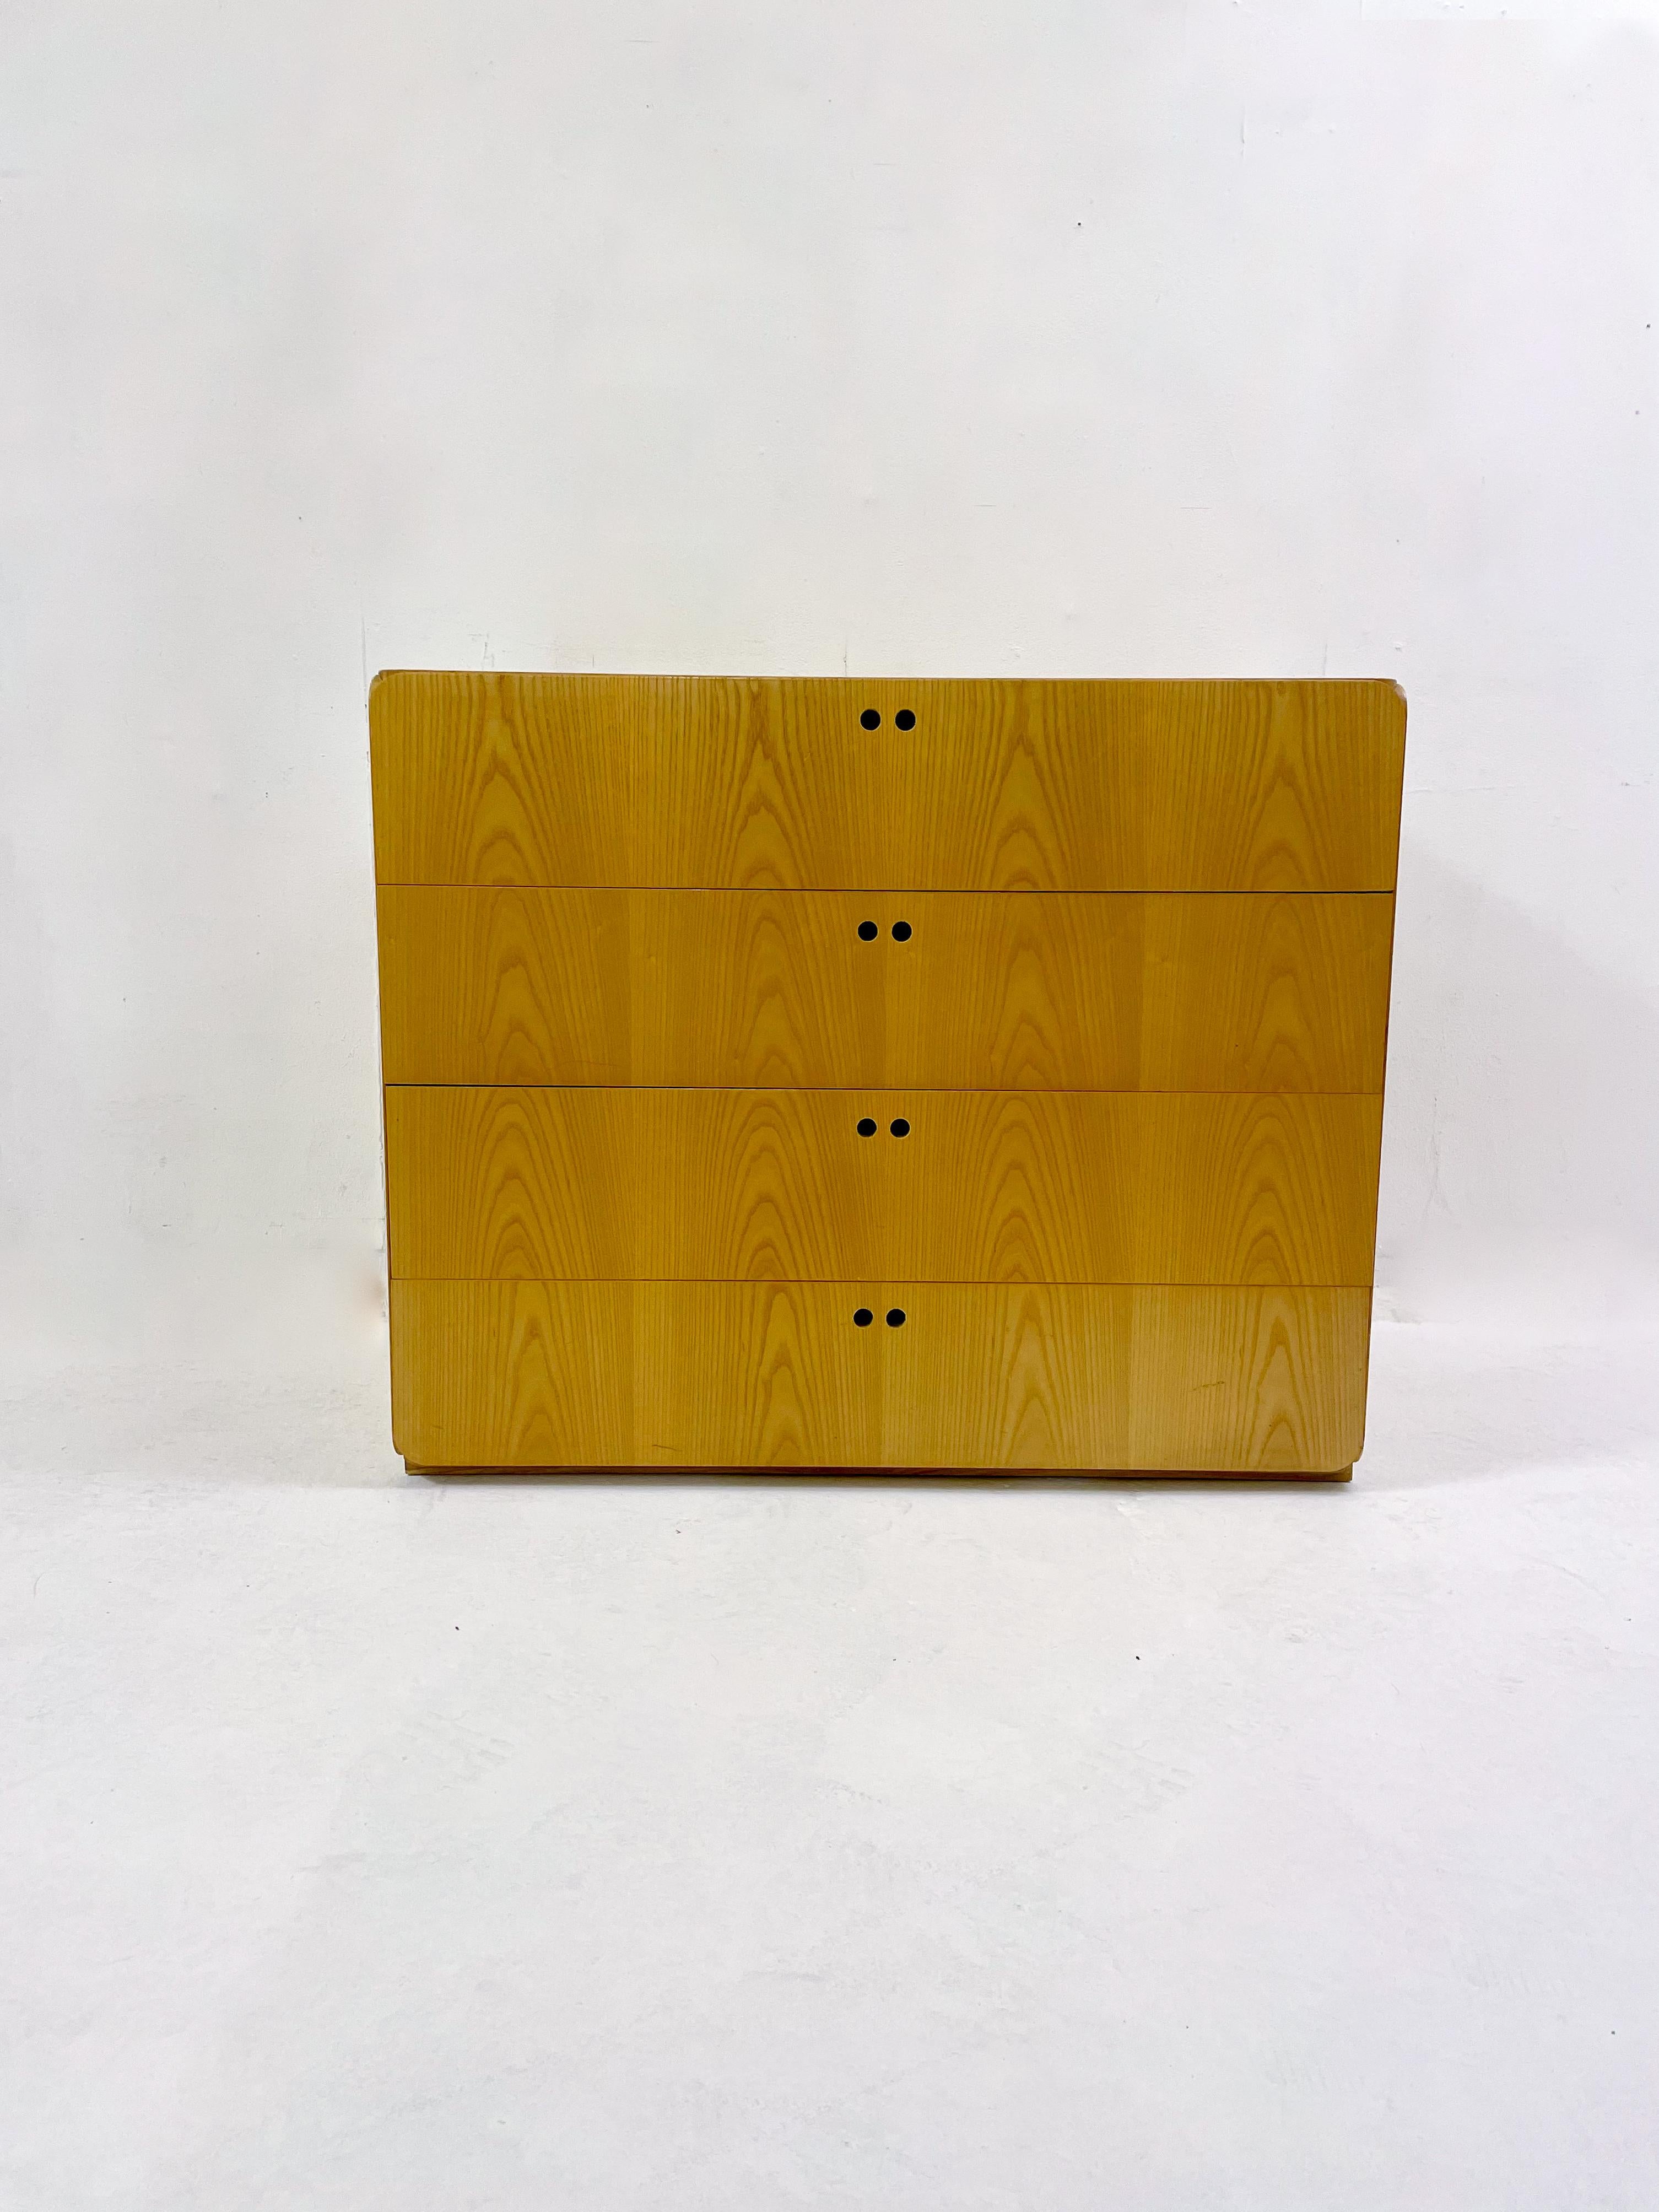 Chest of Drawers by Derk Jan de Vries, Wood, 1980s.